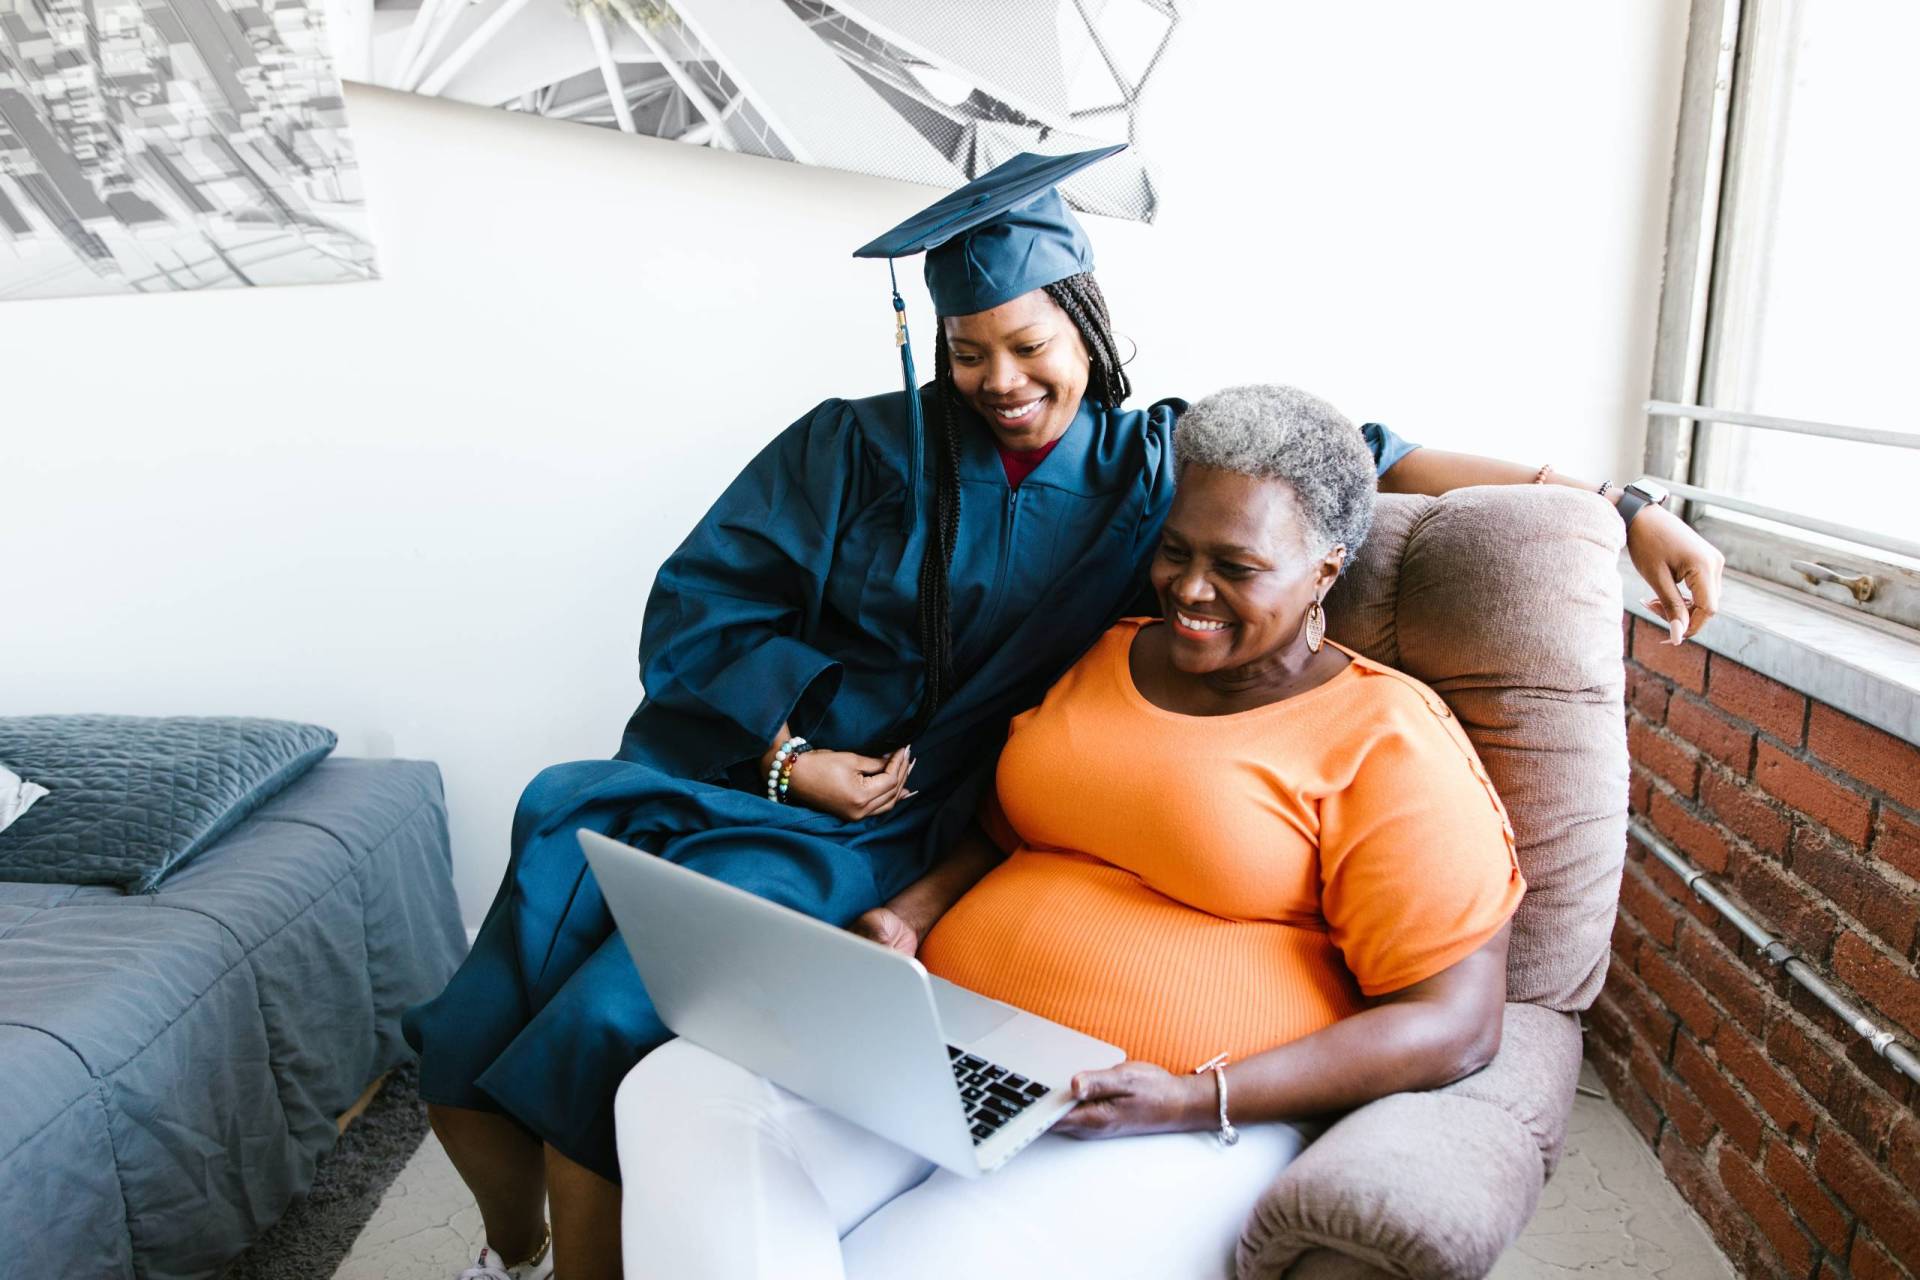 Two people, one older and one younger, sit on a stuffed seat looking at a laptop. The younger person is wearing college graduation clothes.